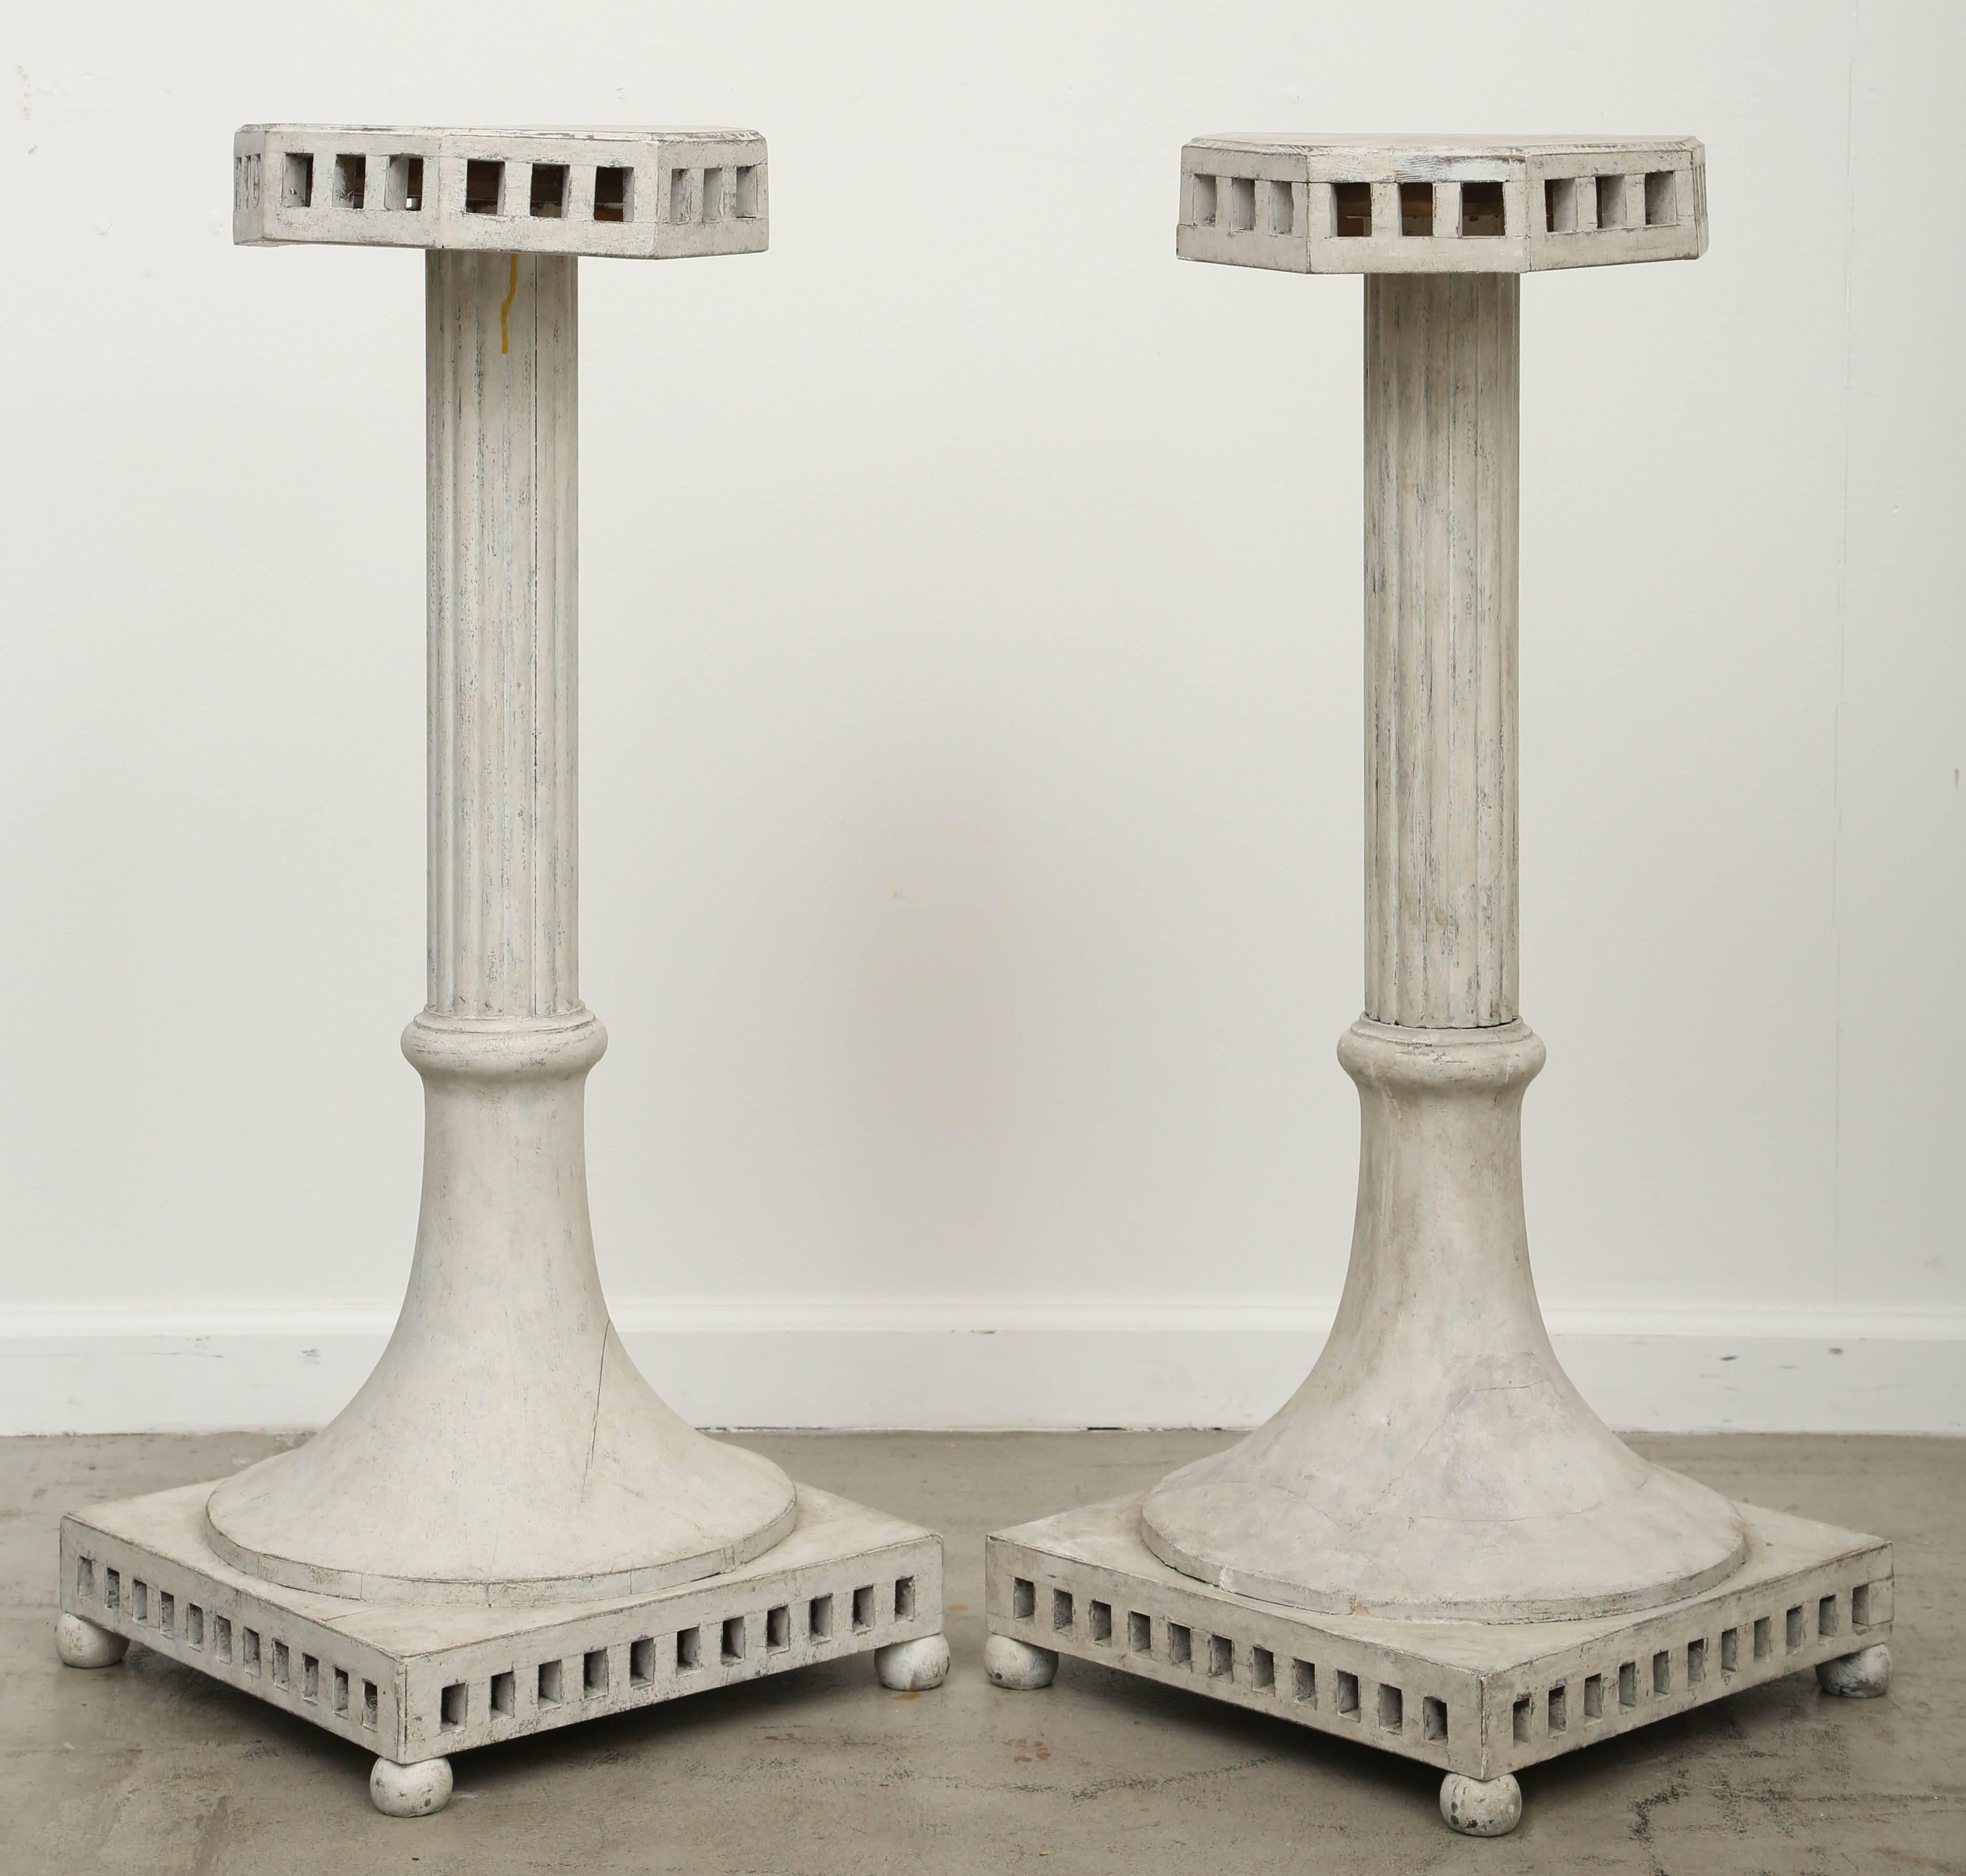 Pair of antique Swedish Gustavian style painted pedestals, mid-19th century.
Tops are octagonal shape with a cut-out apron, mounted on a fluted pedestal and flared out lower portion onto a square base with a cut-out lower border, on four small bun